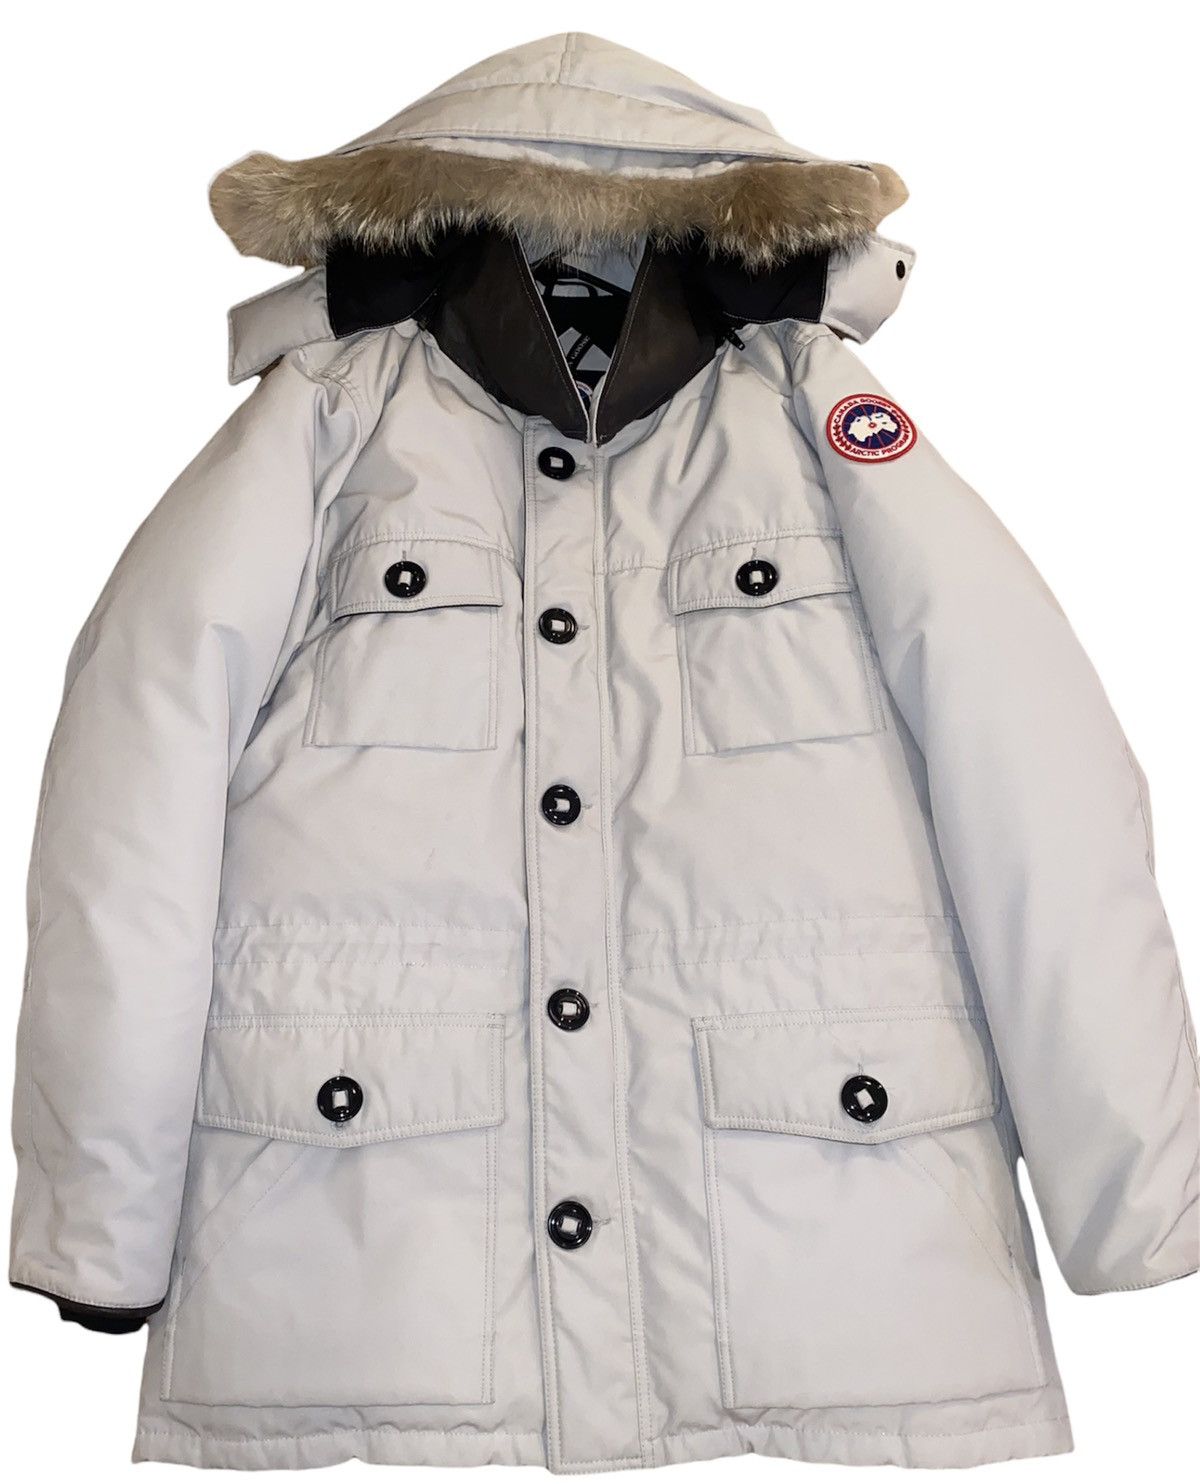 Canada Goose Limited Edition Canada Goose Expedition Parka Size L w ...